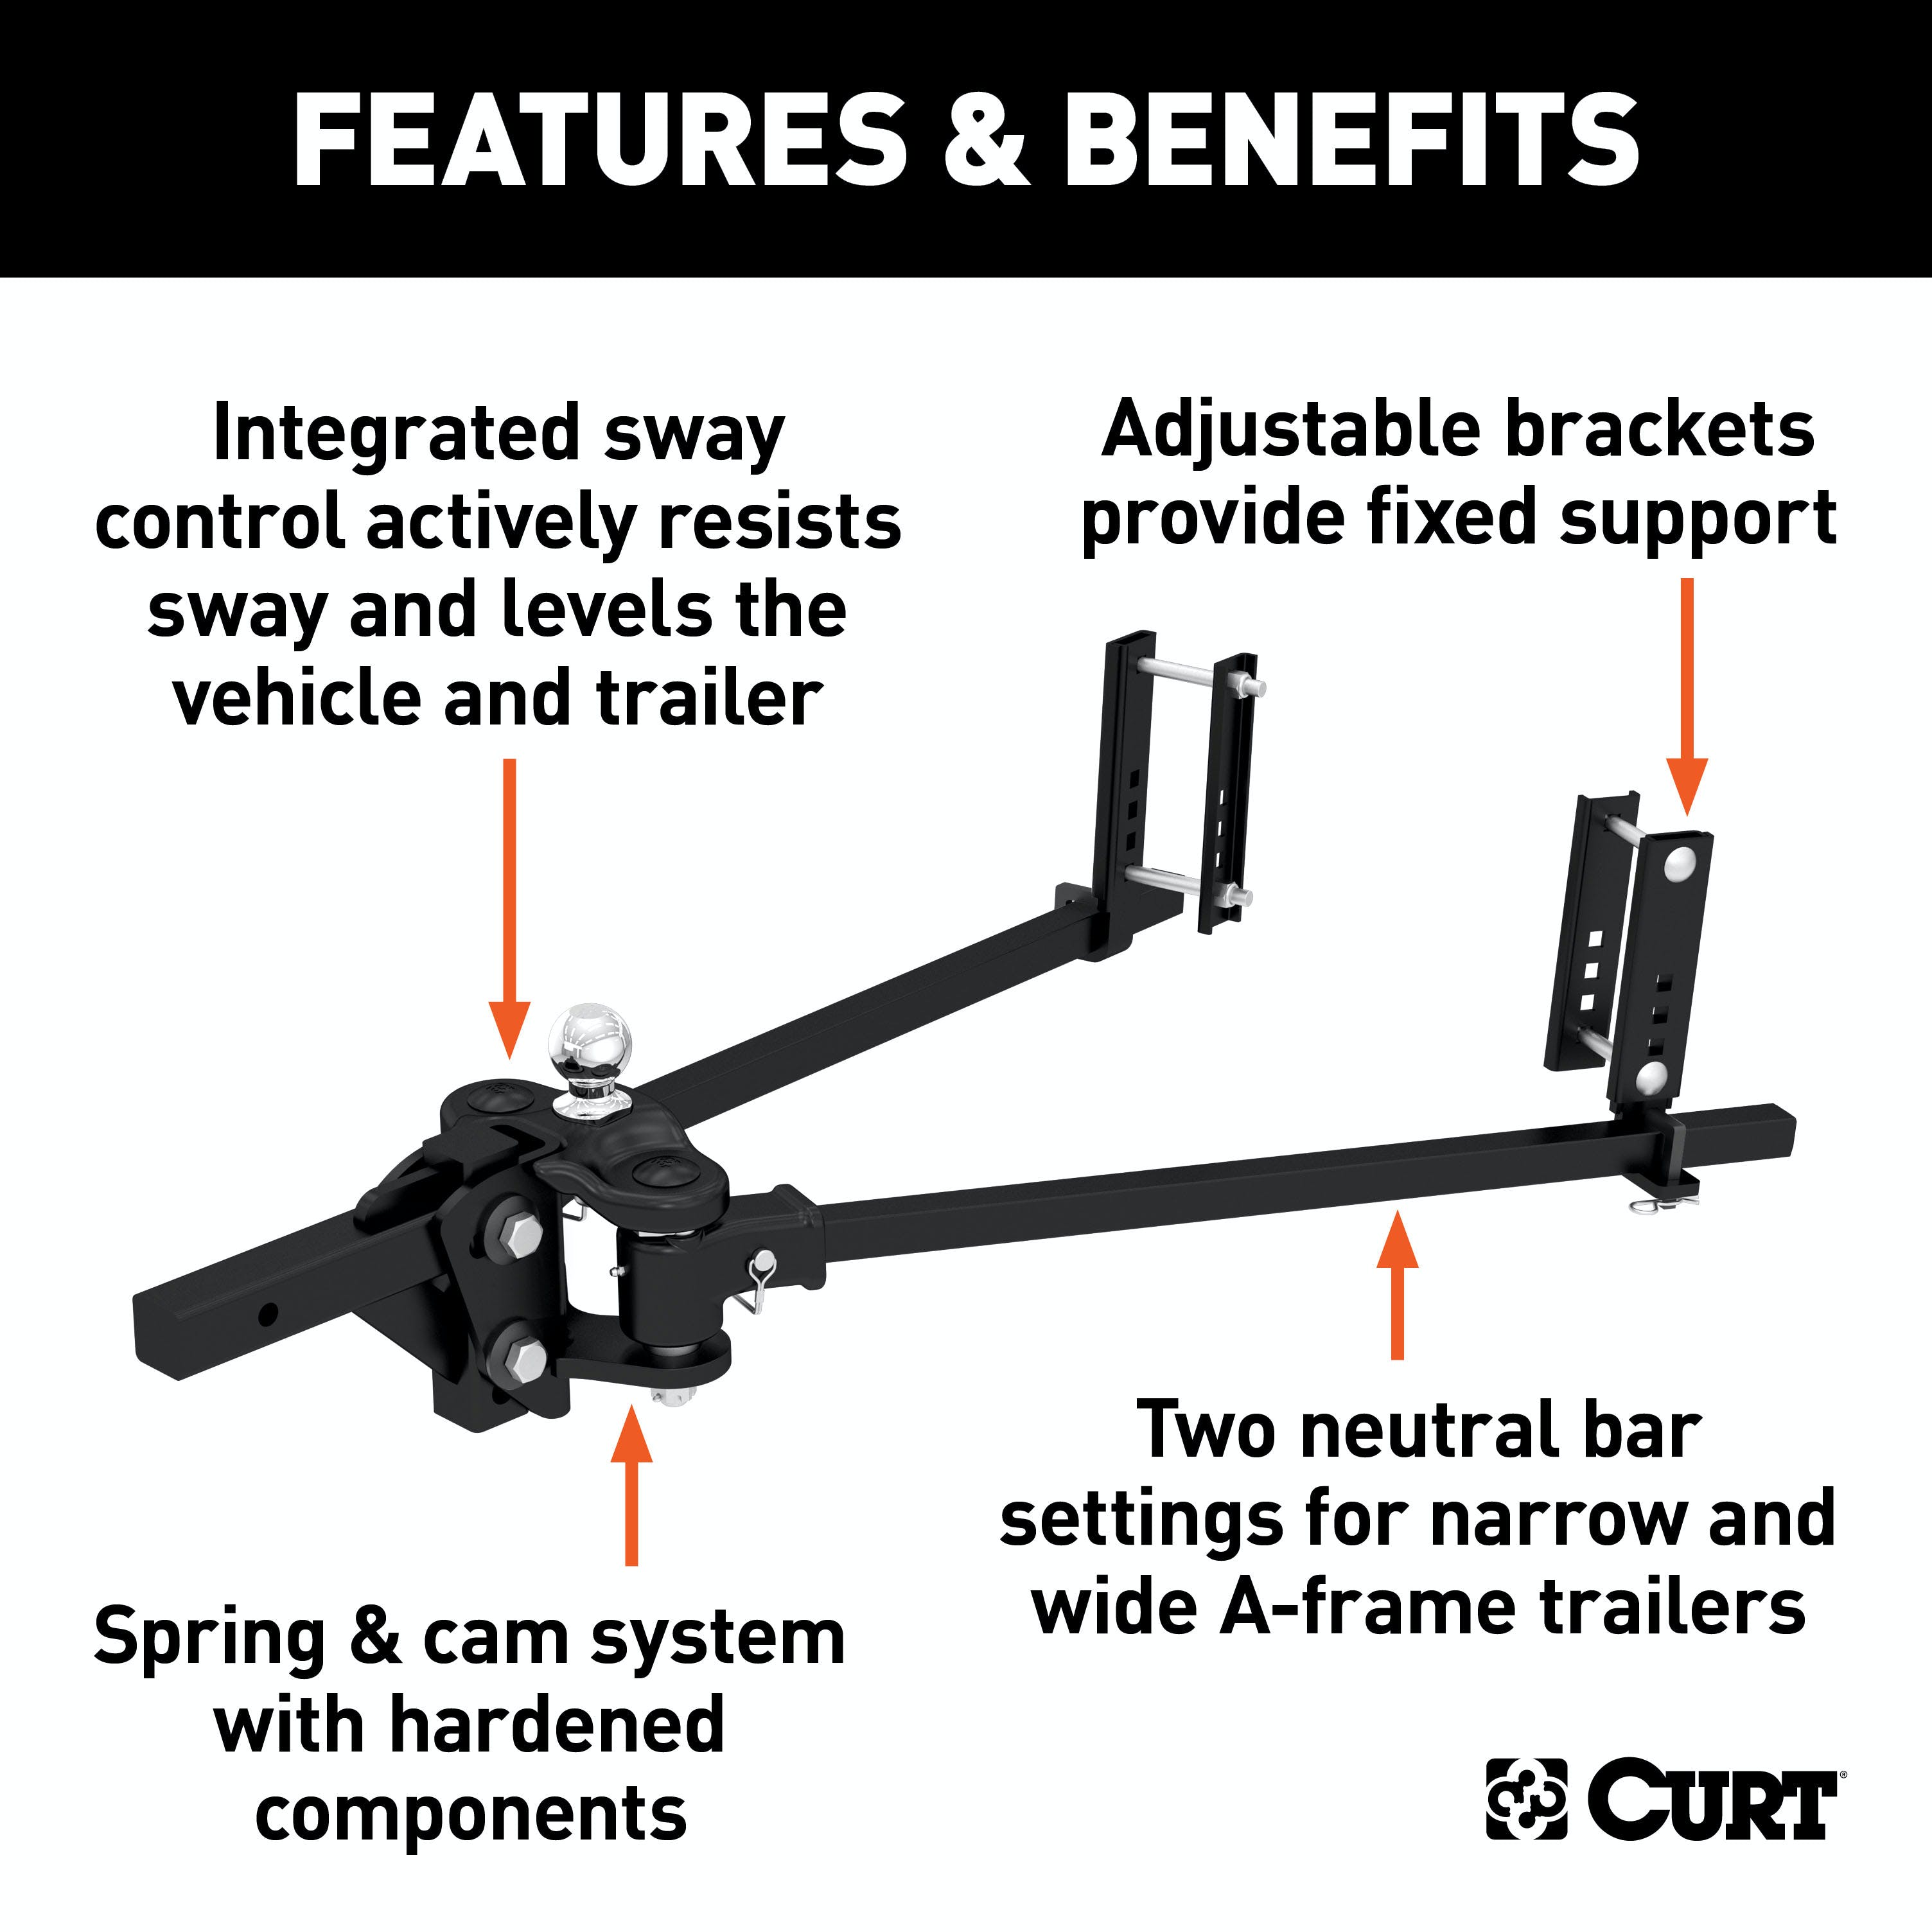 CURT 17501 TruTrack Weight Distribution Hitch with Sway Control (10-15K, 35-9/16 Bars)